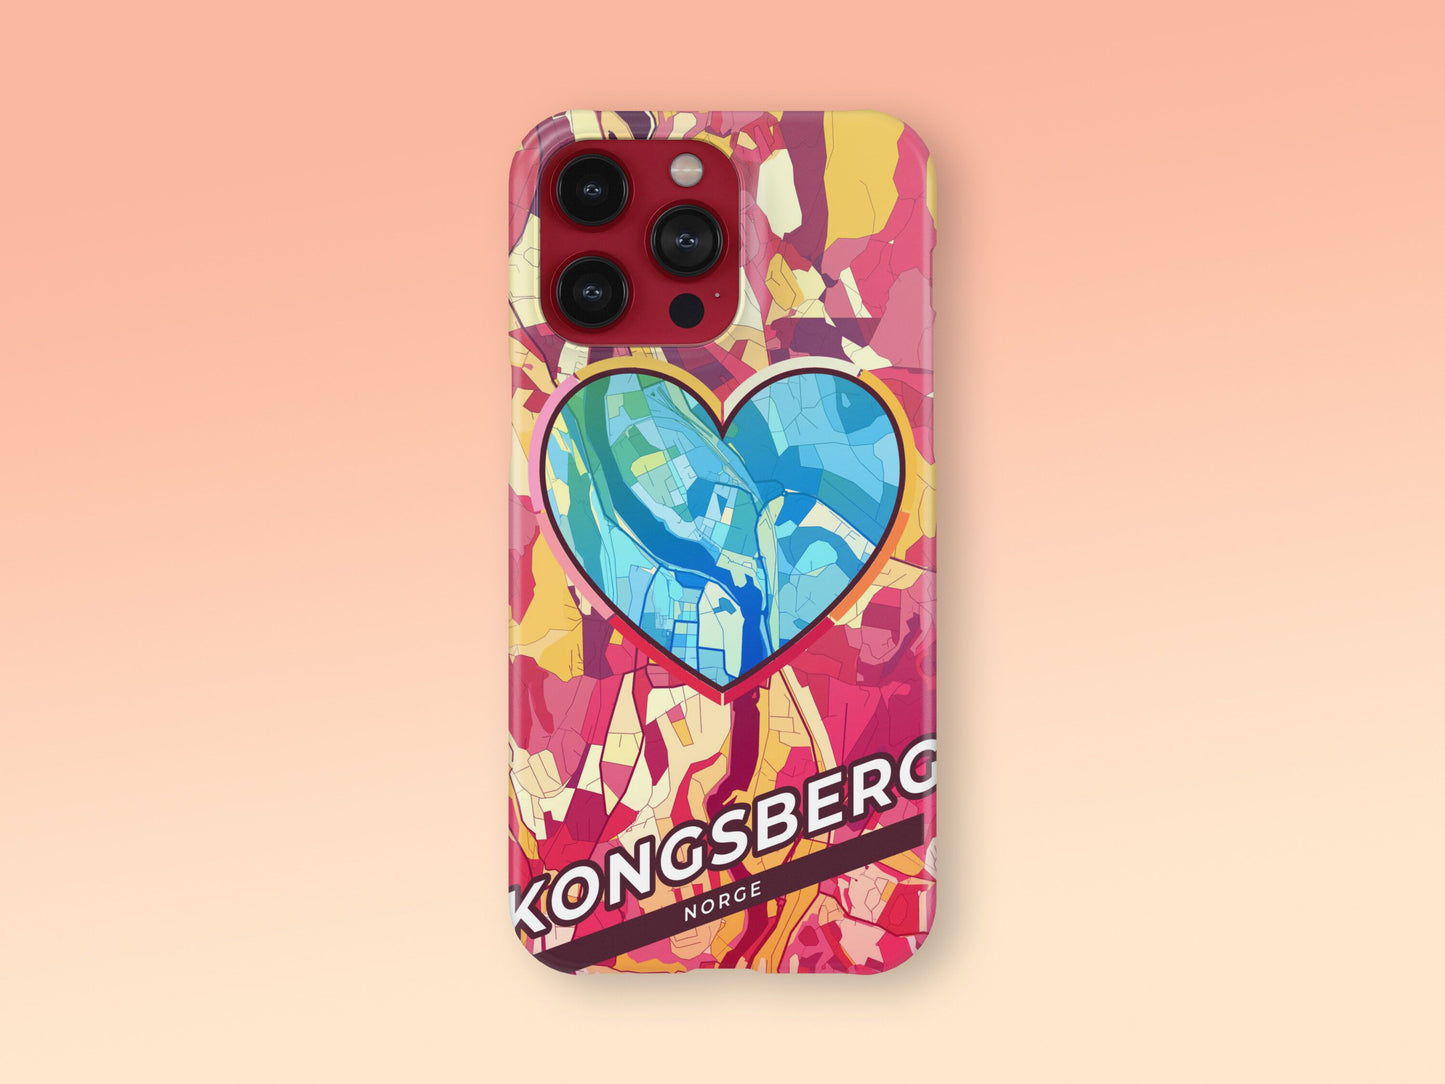 Kongsberg Norway slim phone case with colorful icon. Birthday, wedding or housewarming gift. Couple match cases. 2